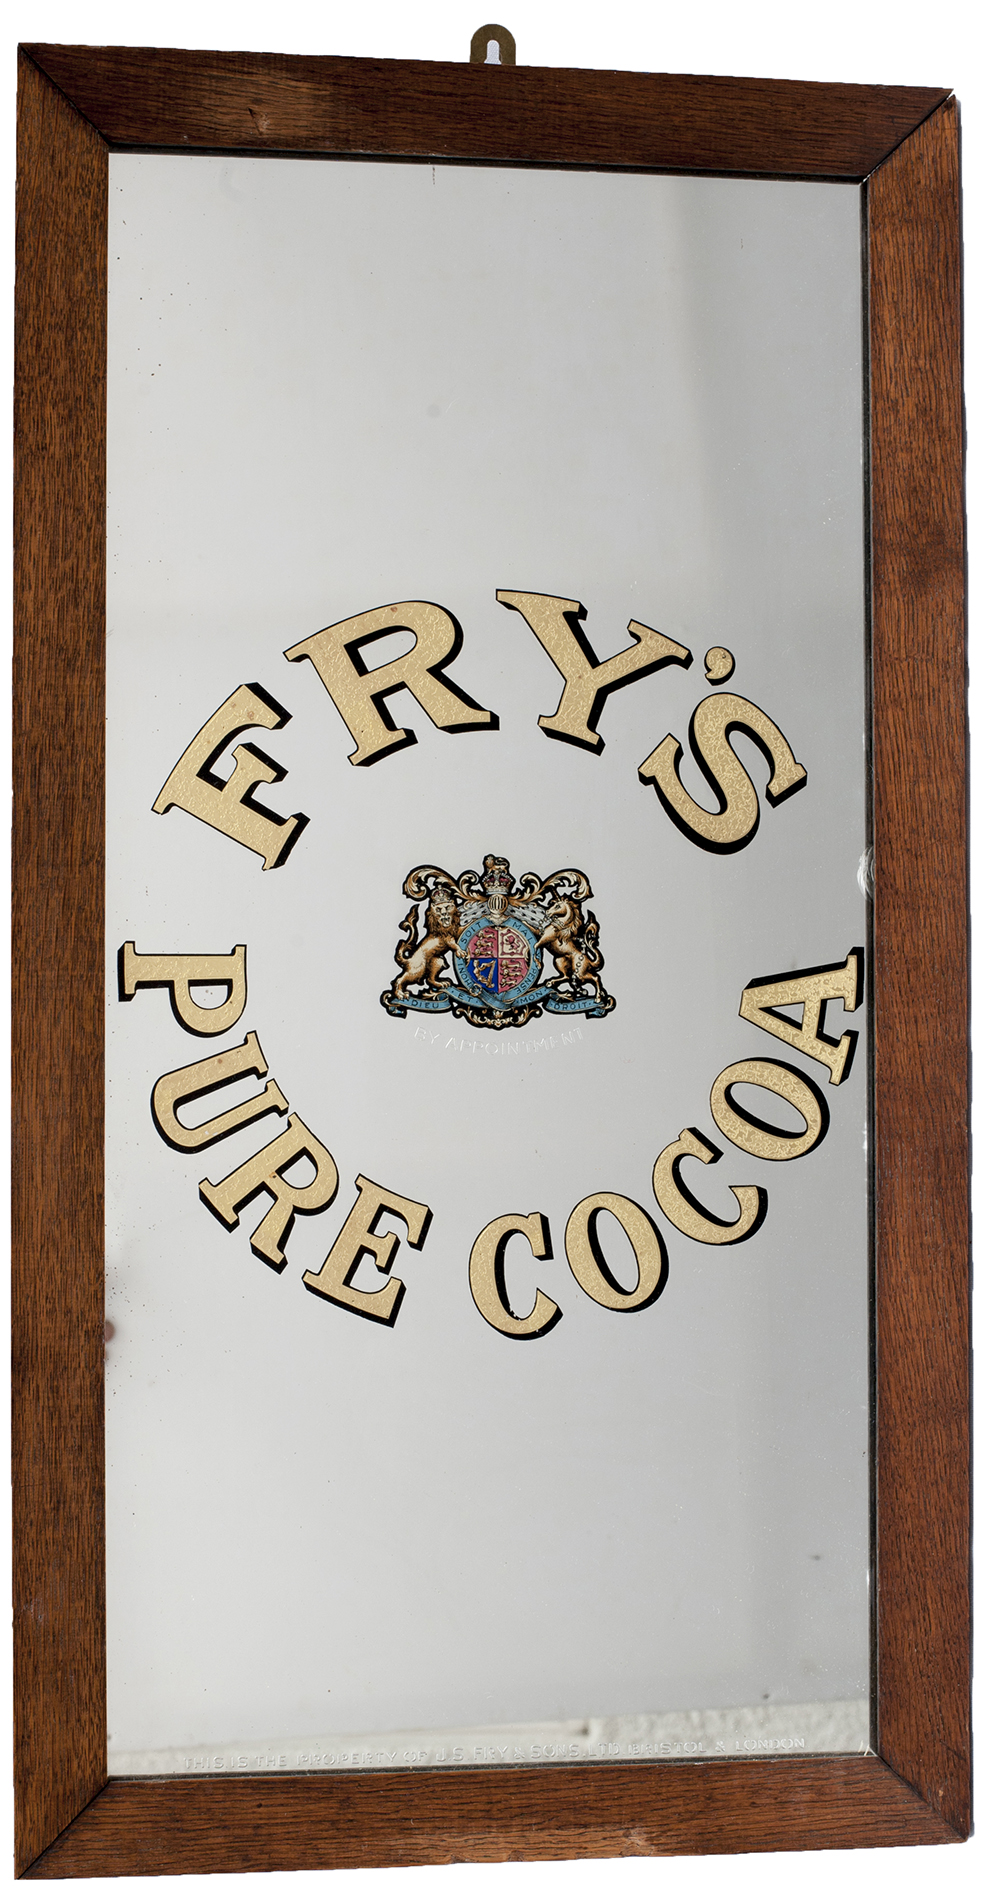 Advertising mirror FRY'S PURE COCOA with Royal Warrant Crest to the centre. In original oak frame